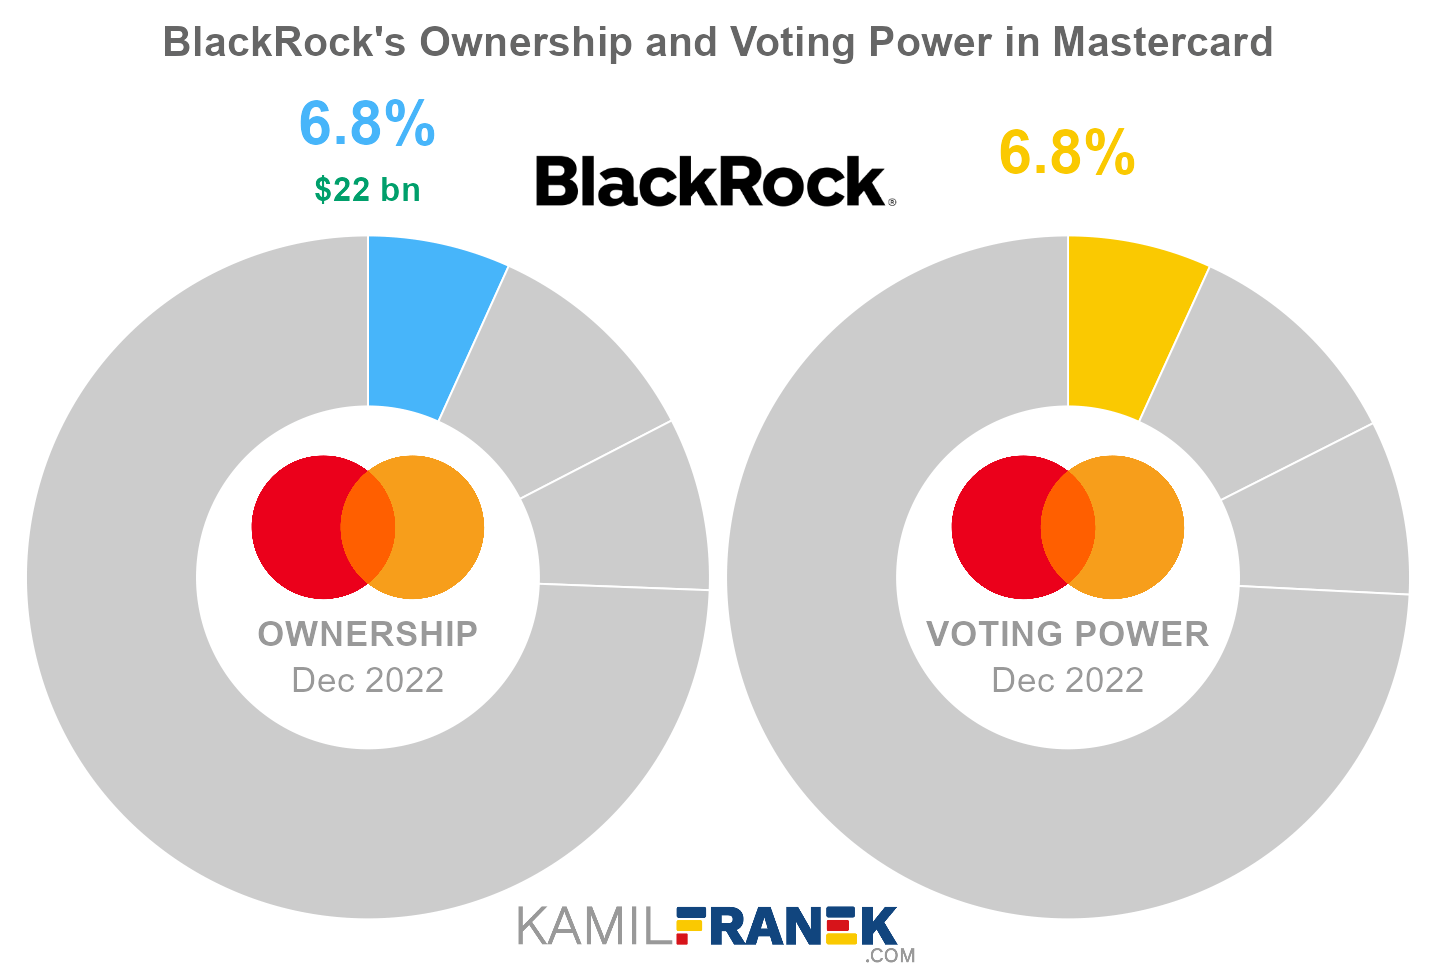 BlackRock's share ownership and voting power in Mastercard (chart)